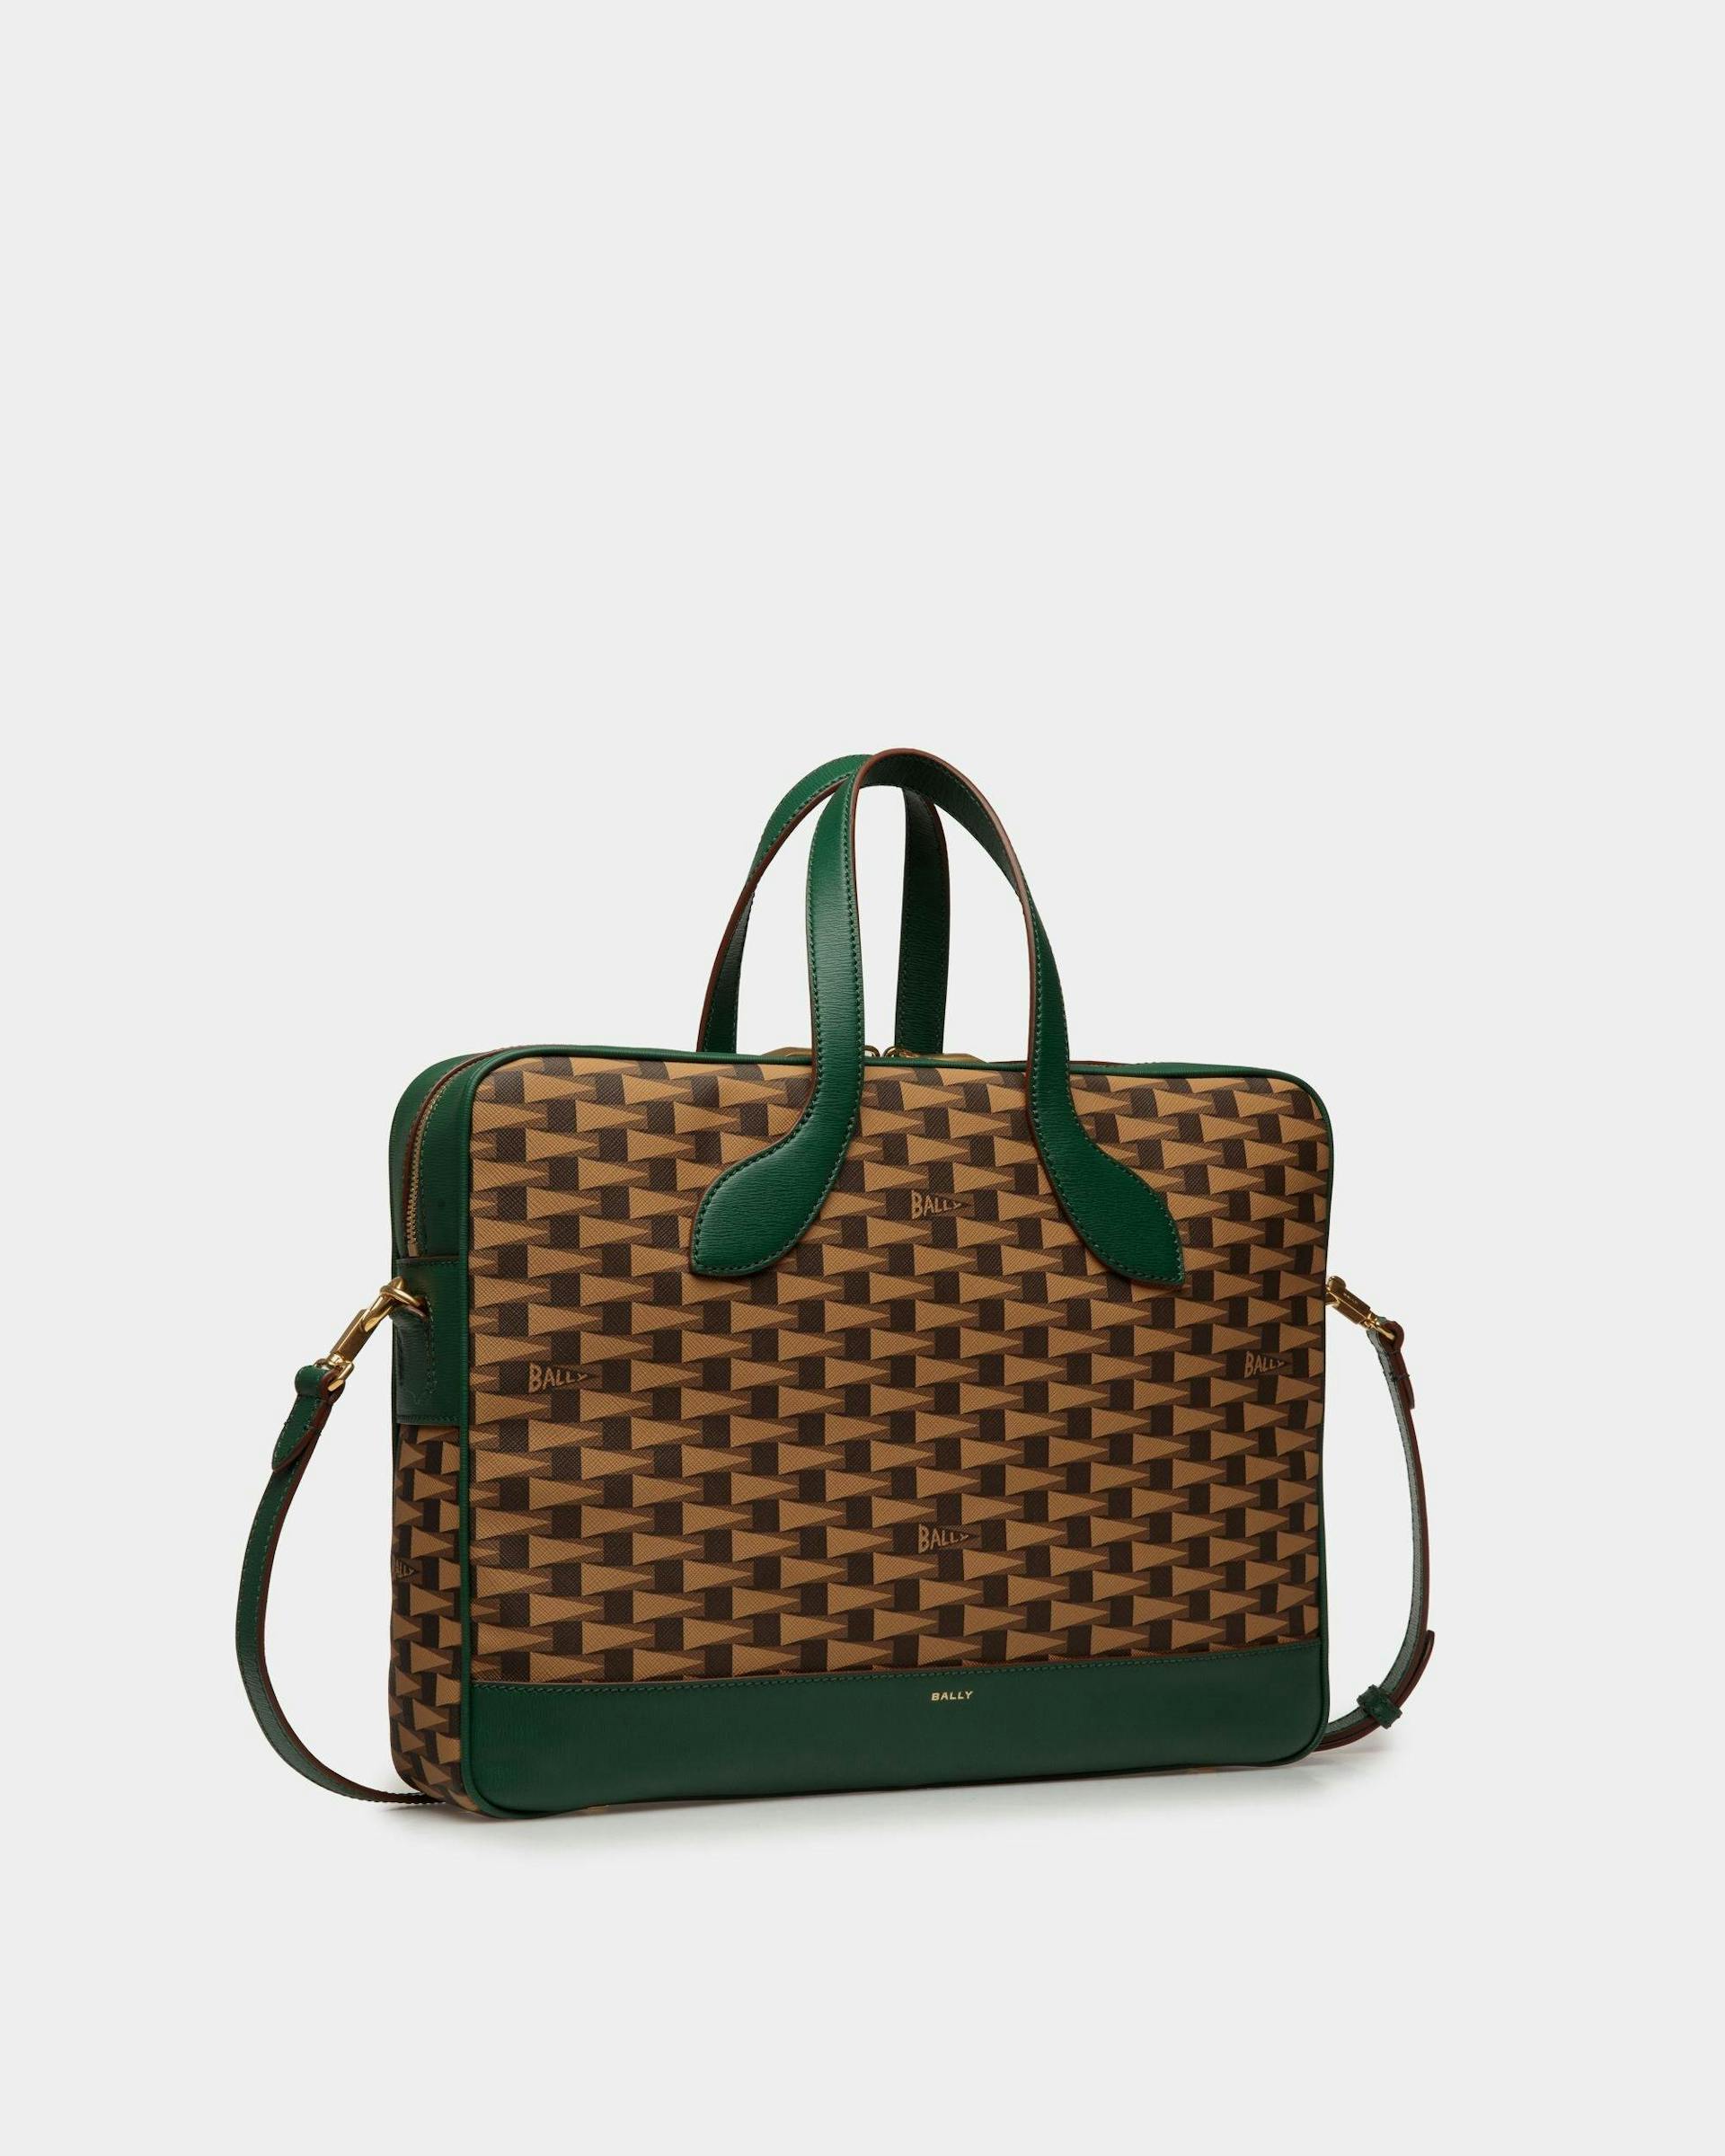 Men's Pennant Briefcase In Desert TPU And Kelly Green Leather | Bally | Still Life 3/4 Front